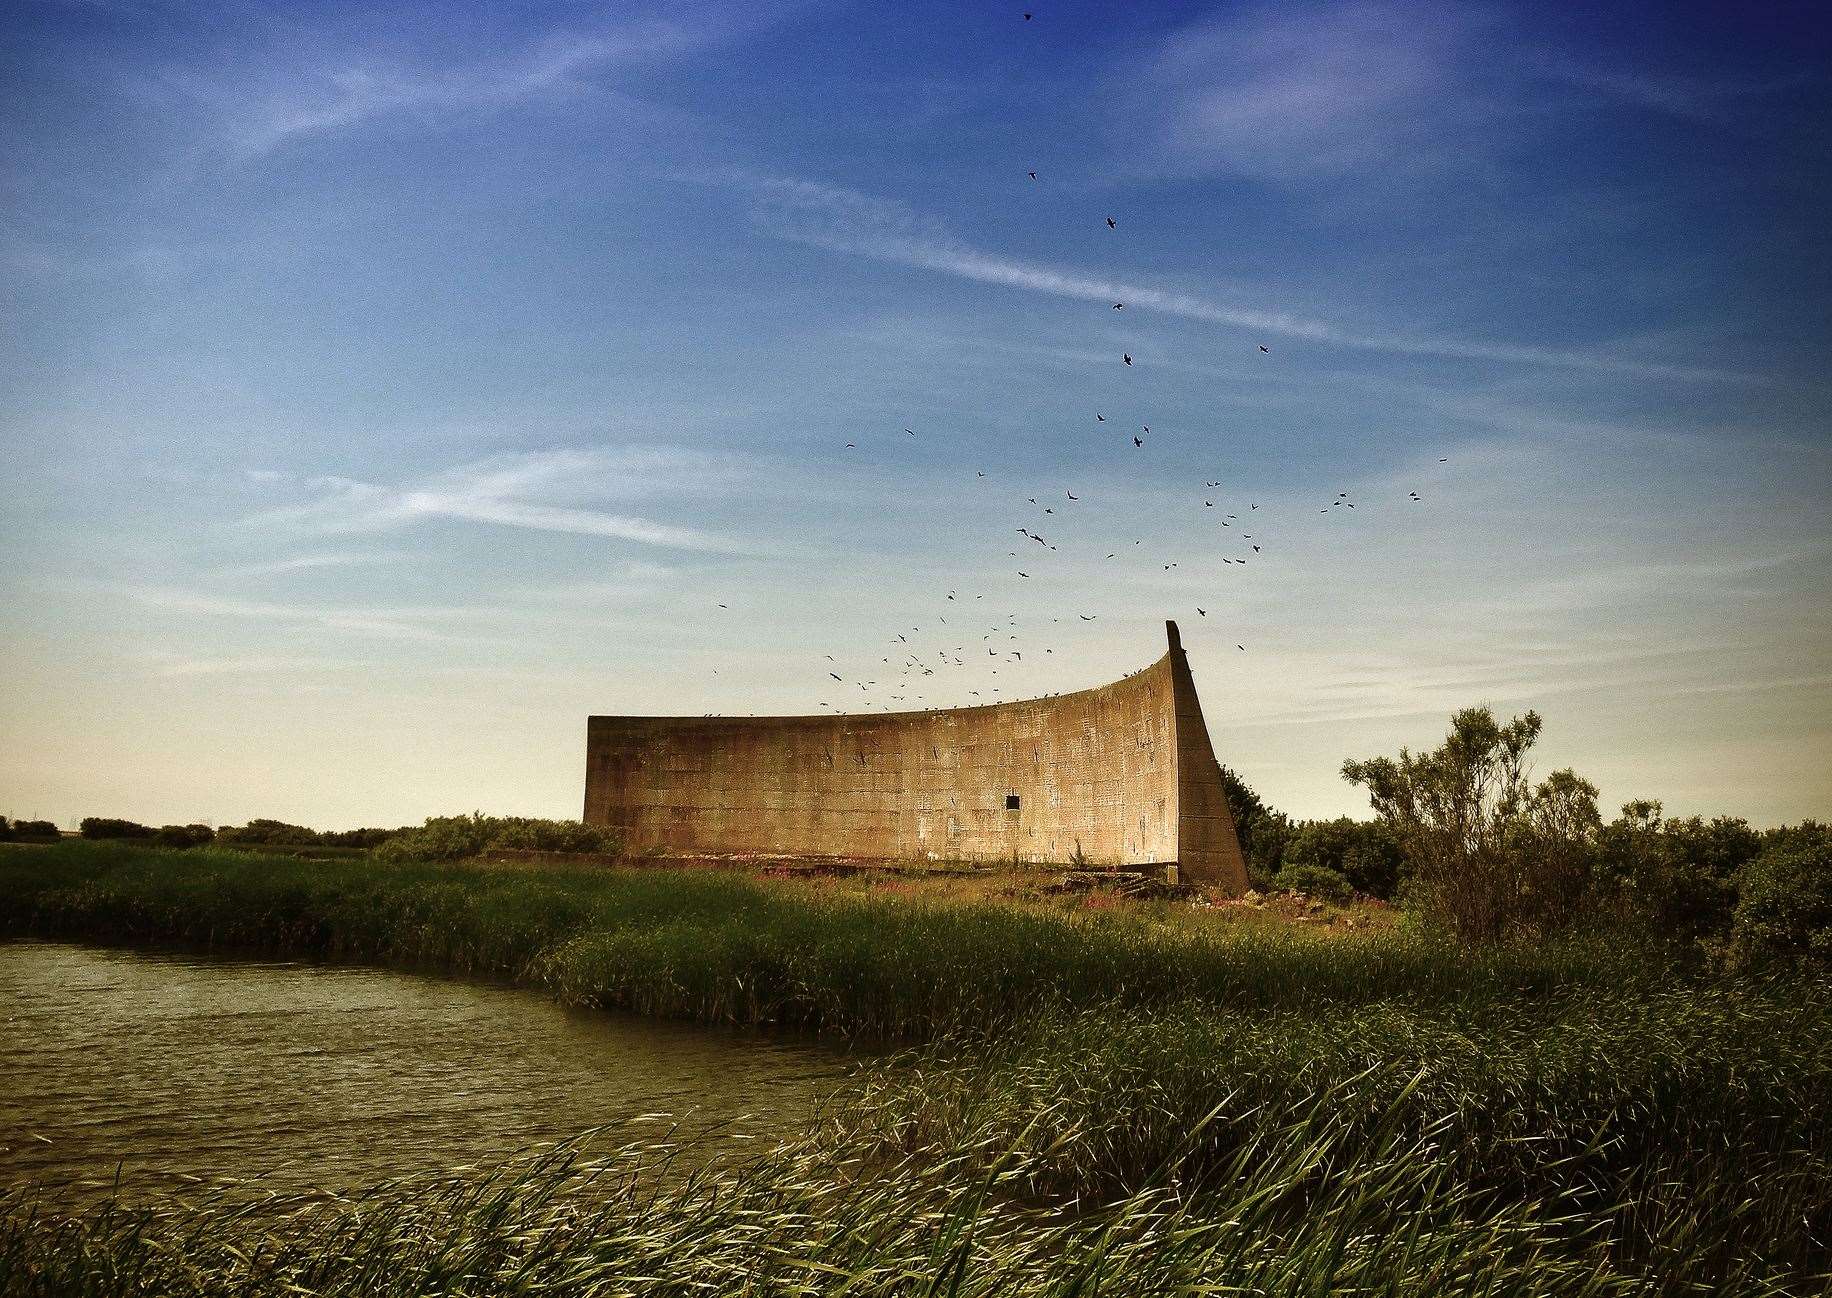 The sound mirrors, or 'listening ears', where filming took place